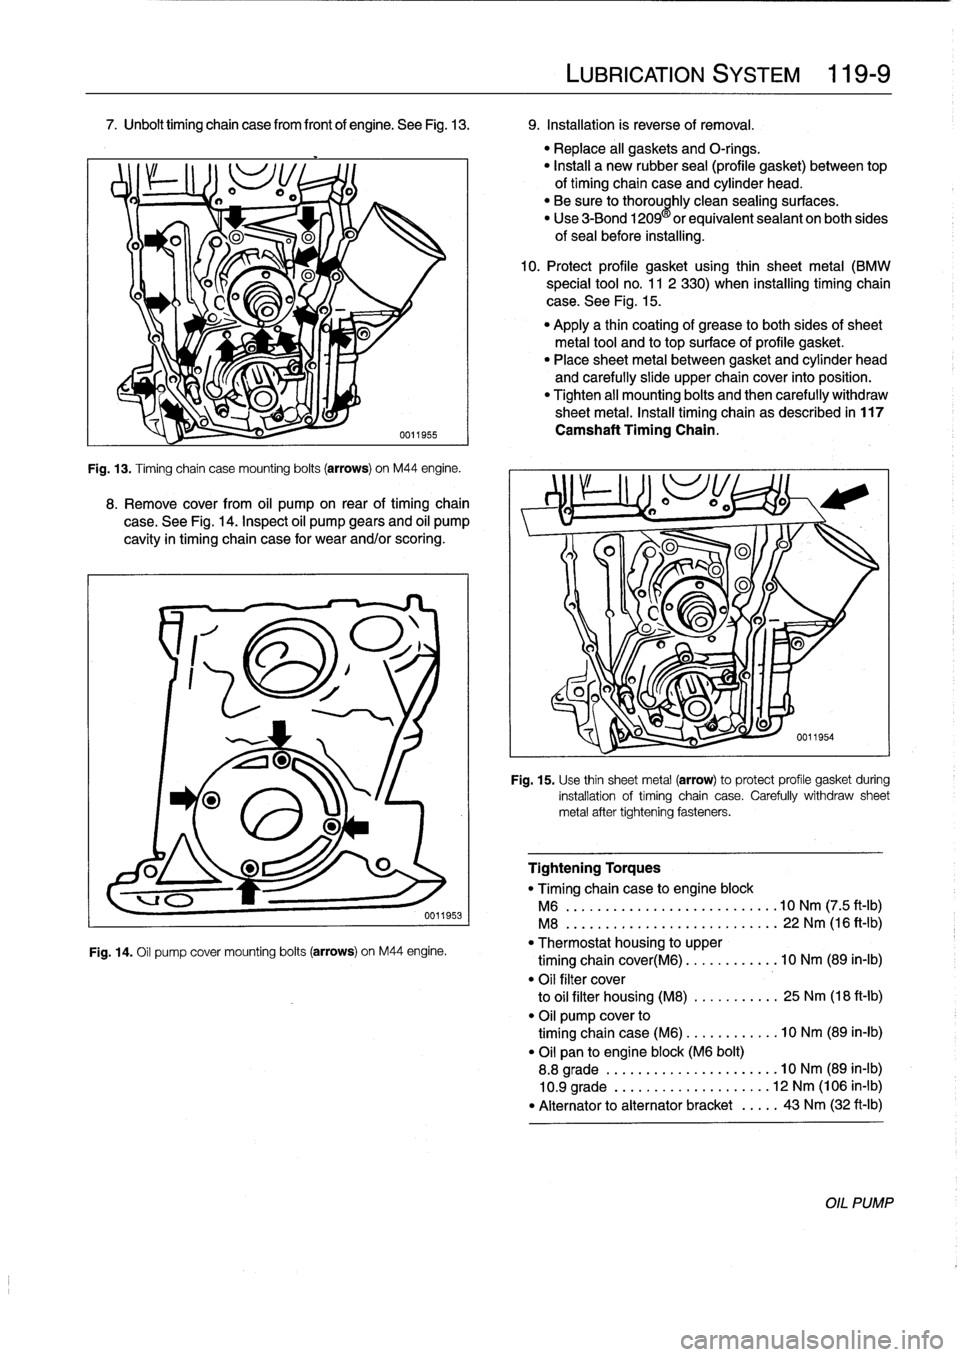 BMW 318i 1997 E36 Owners Manual 7
.
Unbolt
timing
chain
casefrom
frontof
engine
.
See
Fig
.
13
.

	

9
.
Installation
is
reverse
of
removal
.

Fig
.
13
.
Timing
chain
case
mounting
bolts
(arrows)
on
M44
engine
.

8
.
Remove
cover
fr